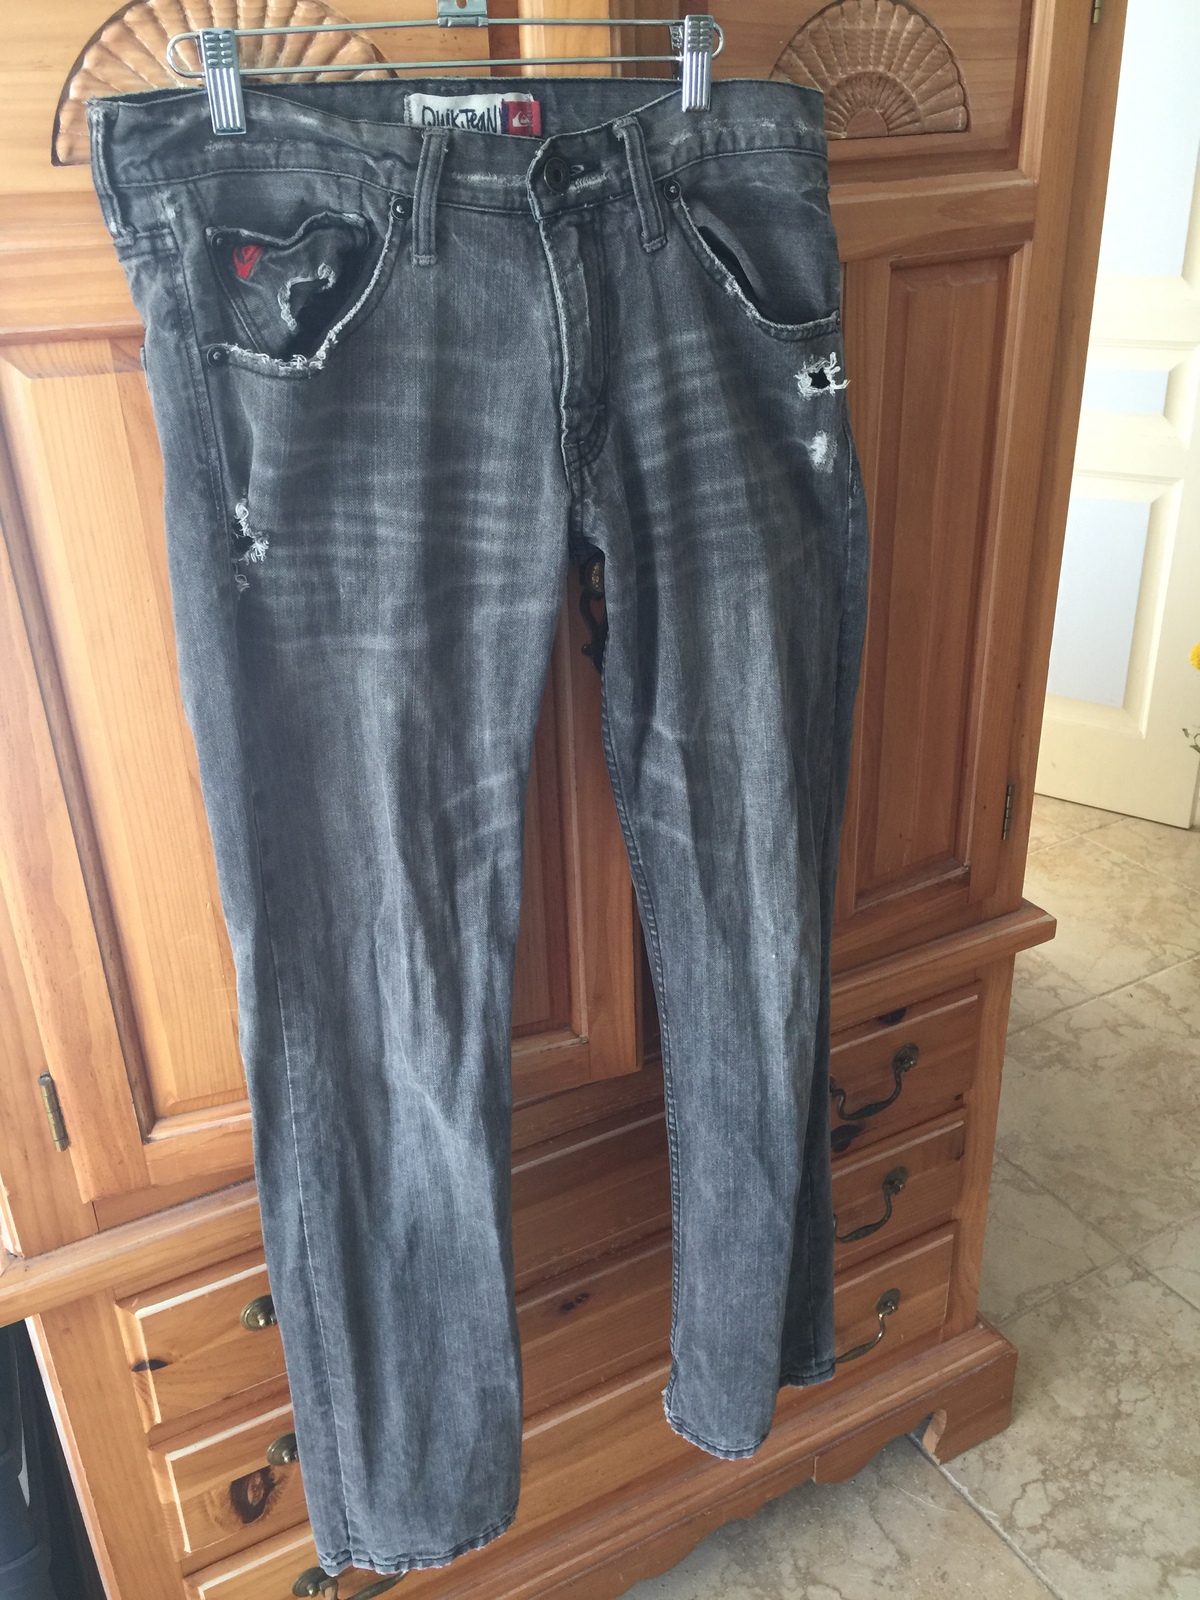  Quiksilver grey distressed jeans size 31 - $36.99